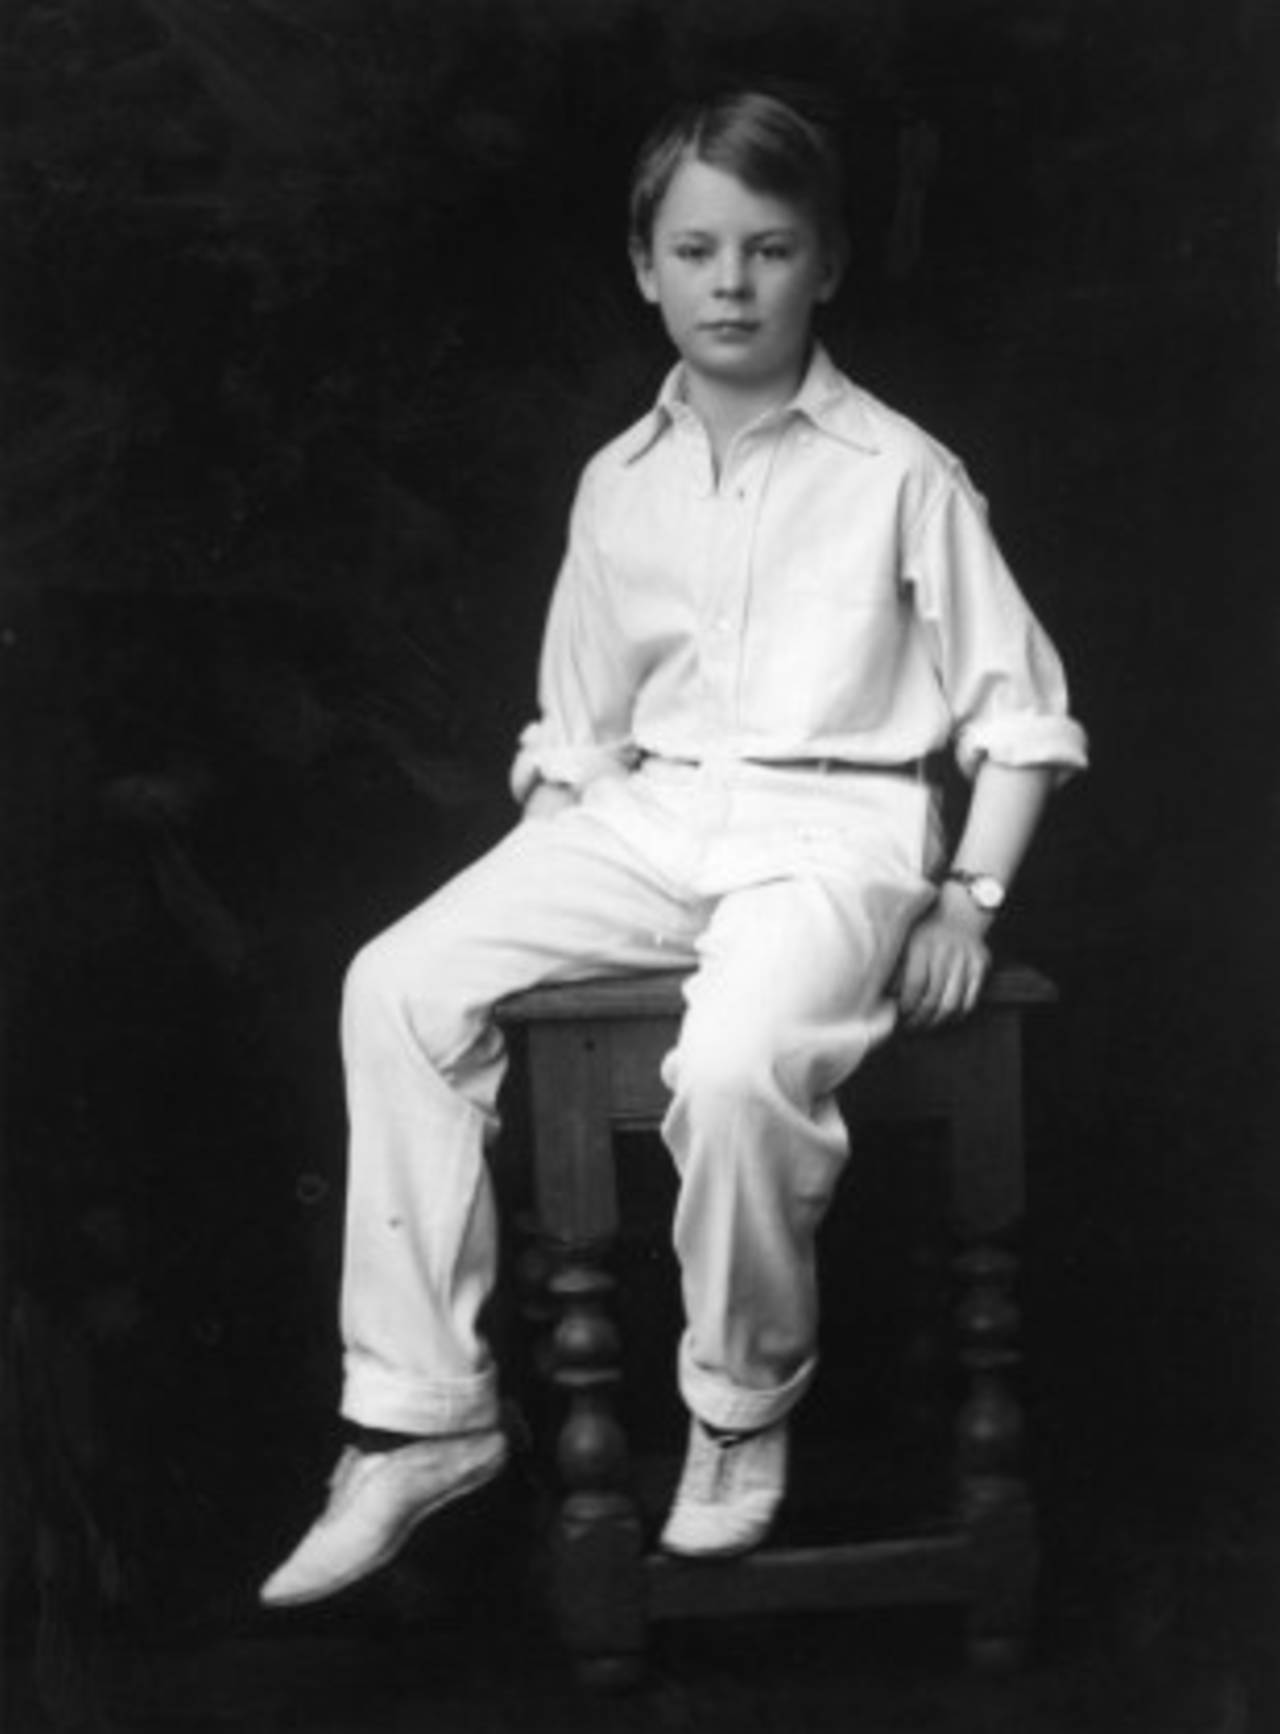 A young boy called Master Harmsworth in his cricket whites, 4 January 1917 